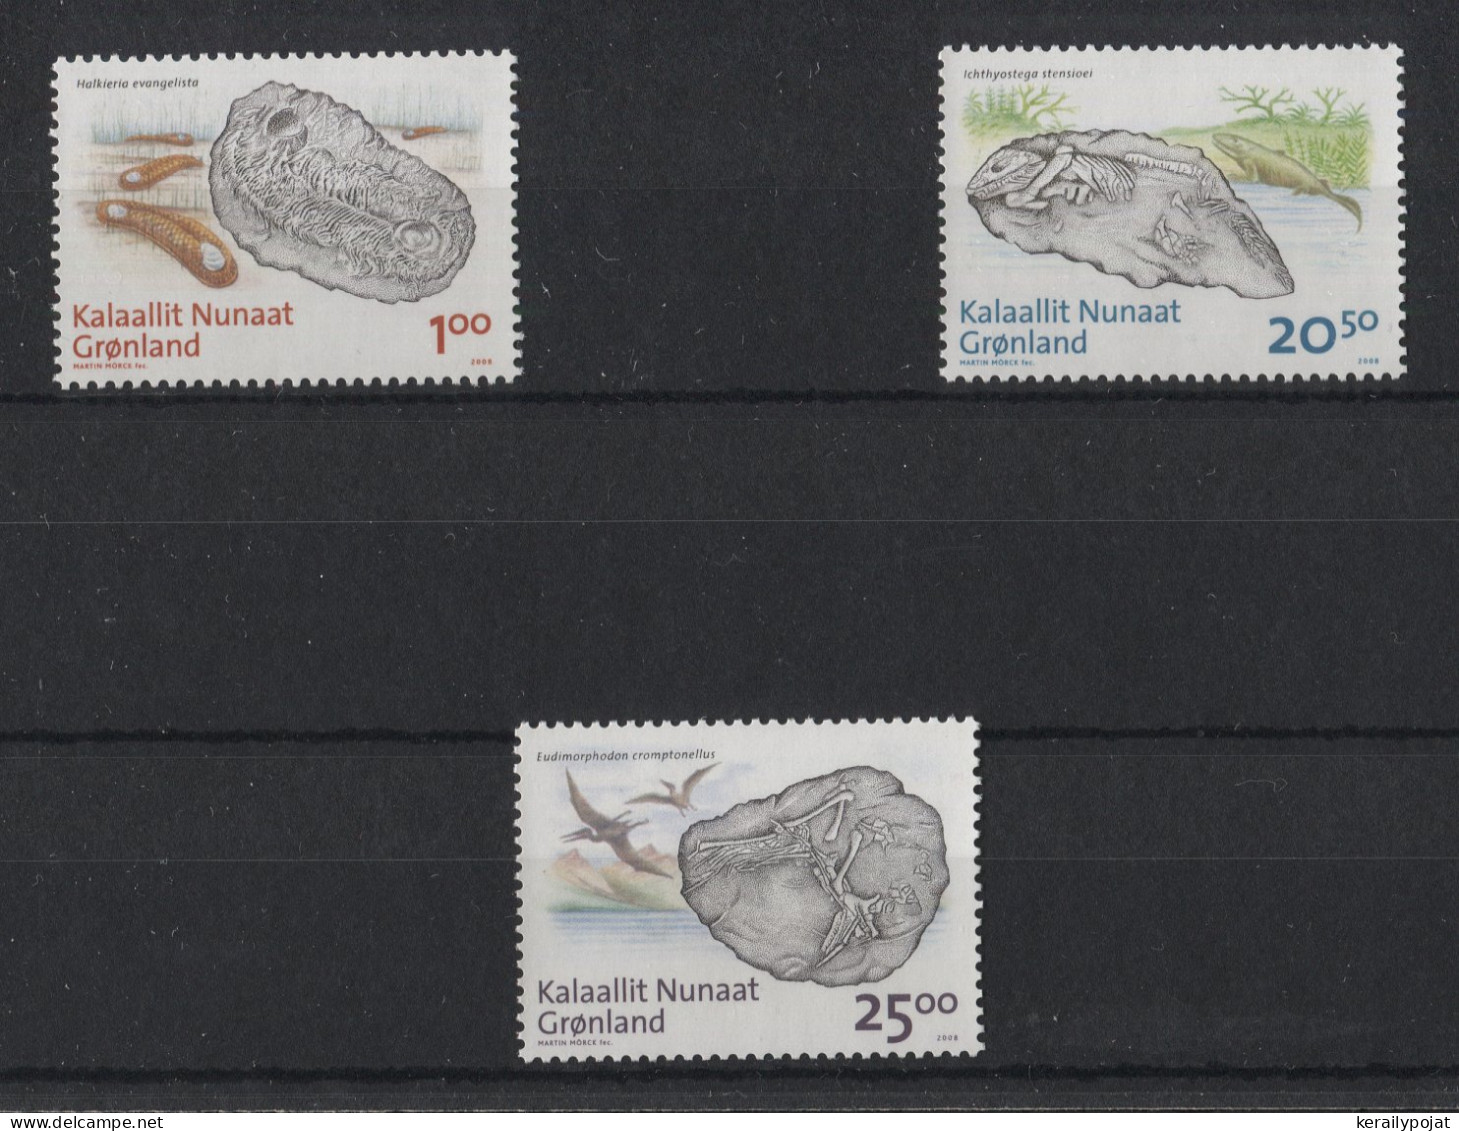 Greenland - 2008 Greenland Fossil Finds MNH__(TH-23170) - Unused Stamps